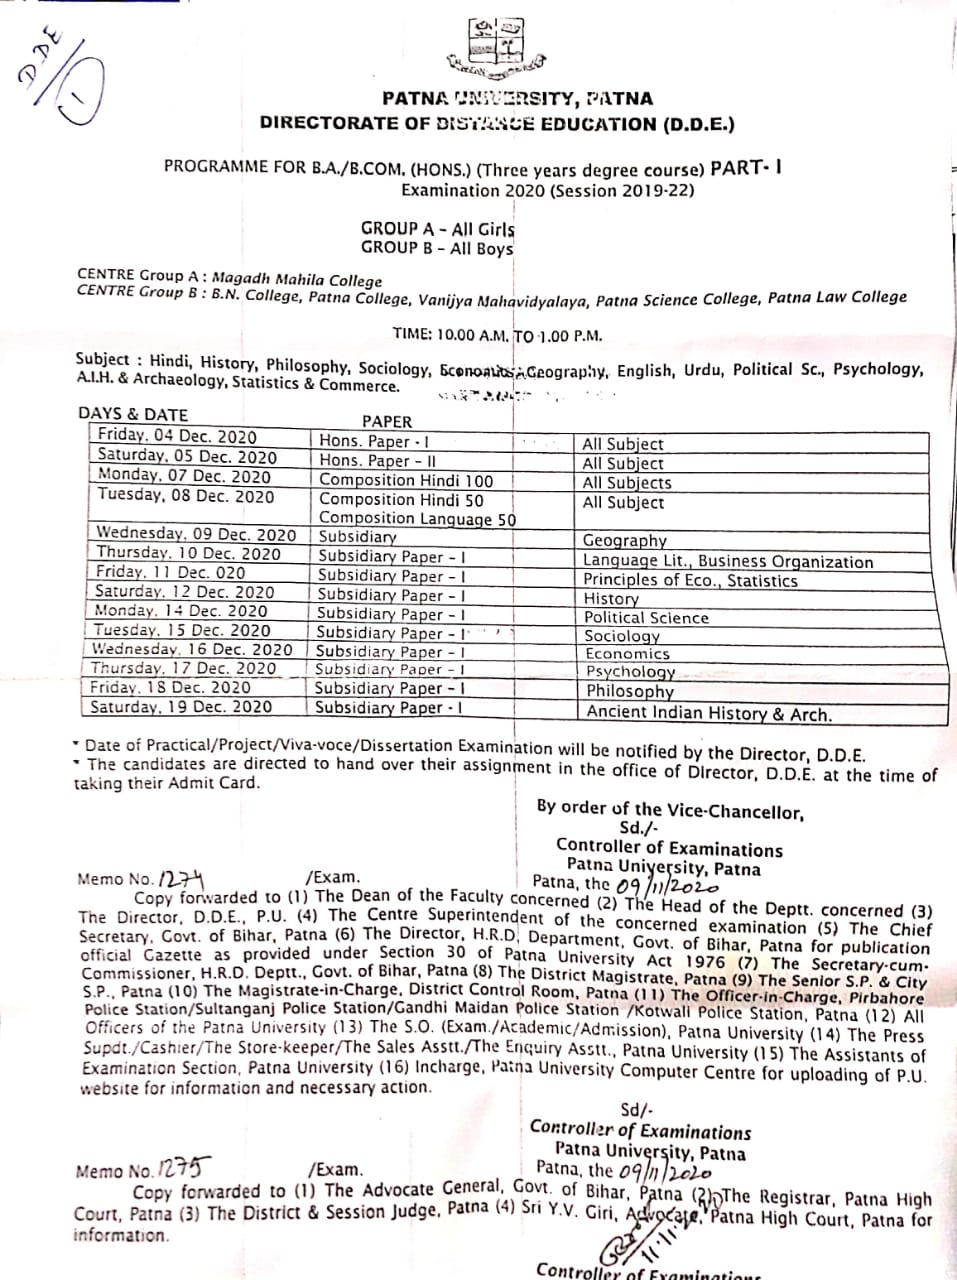 Programme For B.A./ B.Com. (Hons.) (Three Years Degree Course) Part-I Examination 2020 (Session 2019-22)